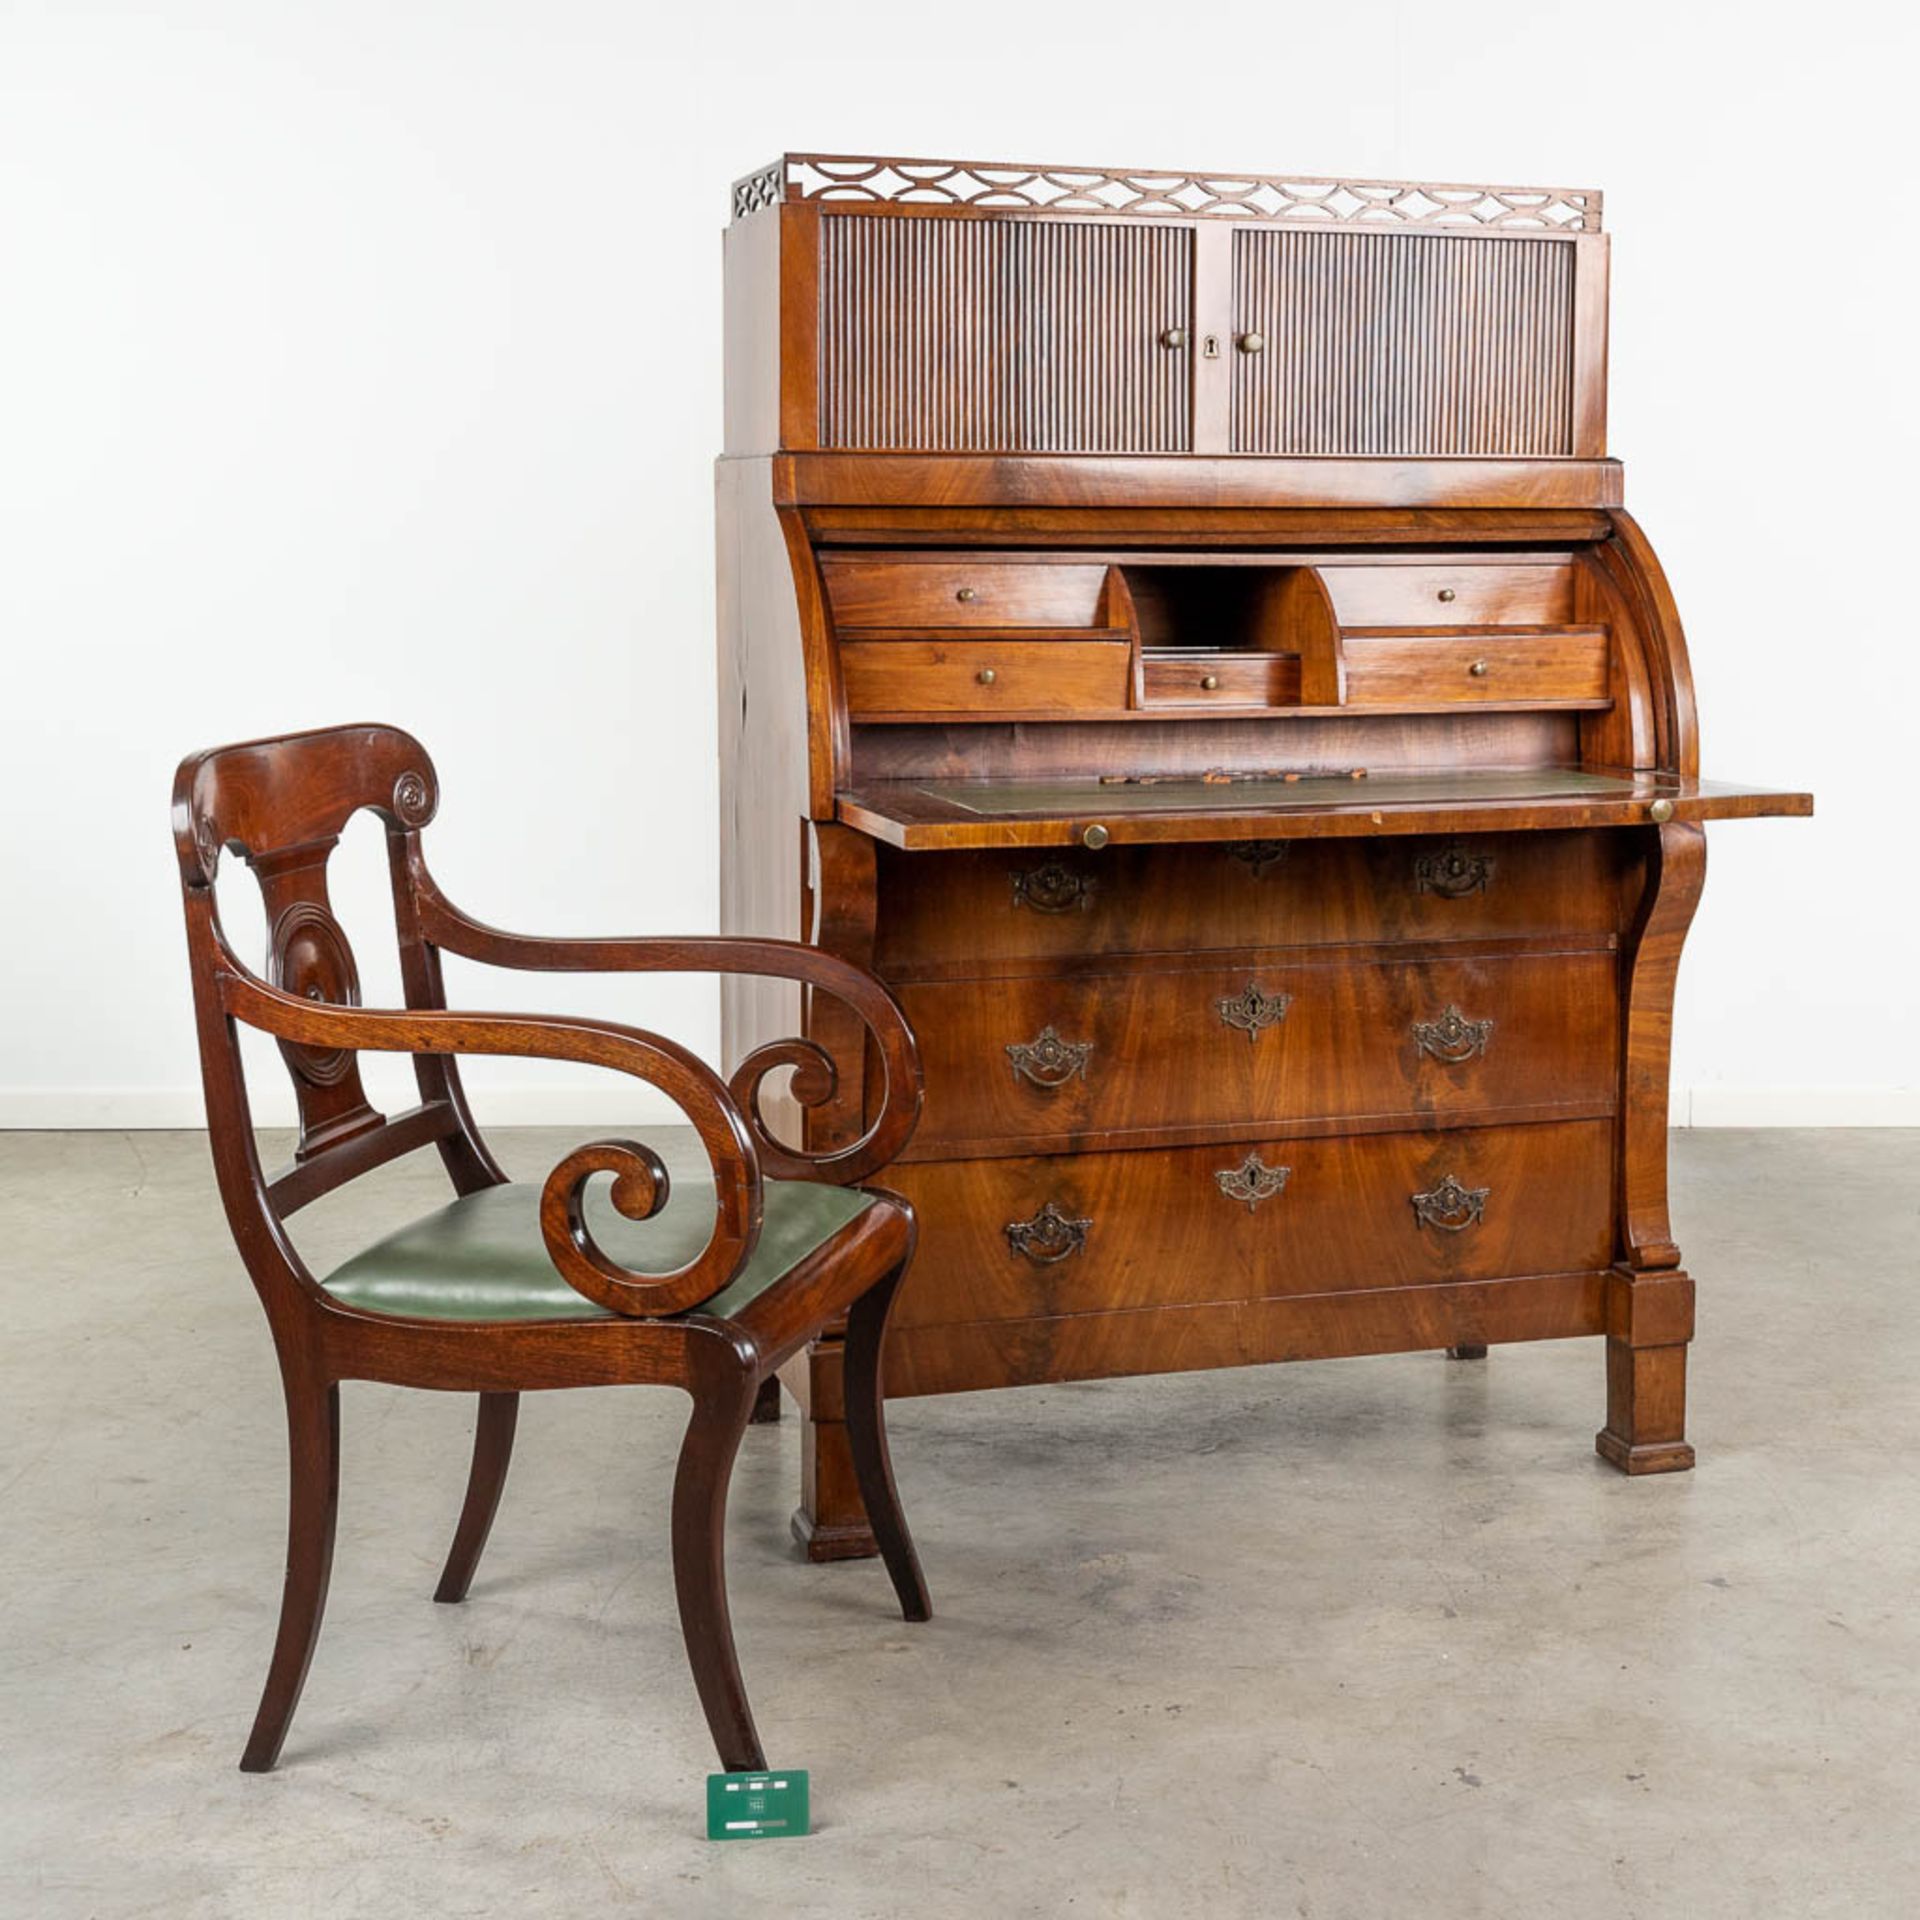 A commode Secretaire, with rolling shutters, mahogany veneer and a matching armchair. 19th century. - Bild 2 aus 25